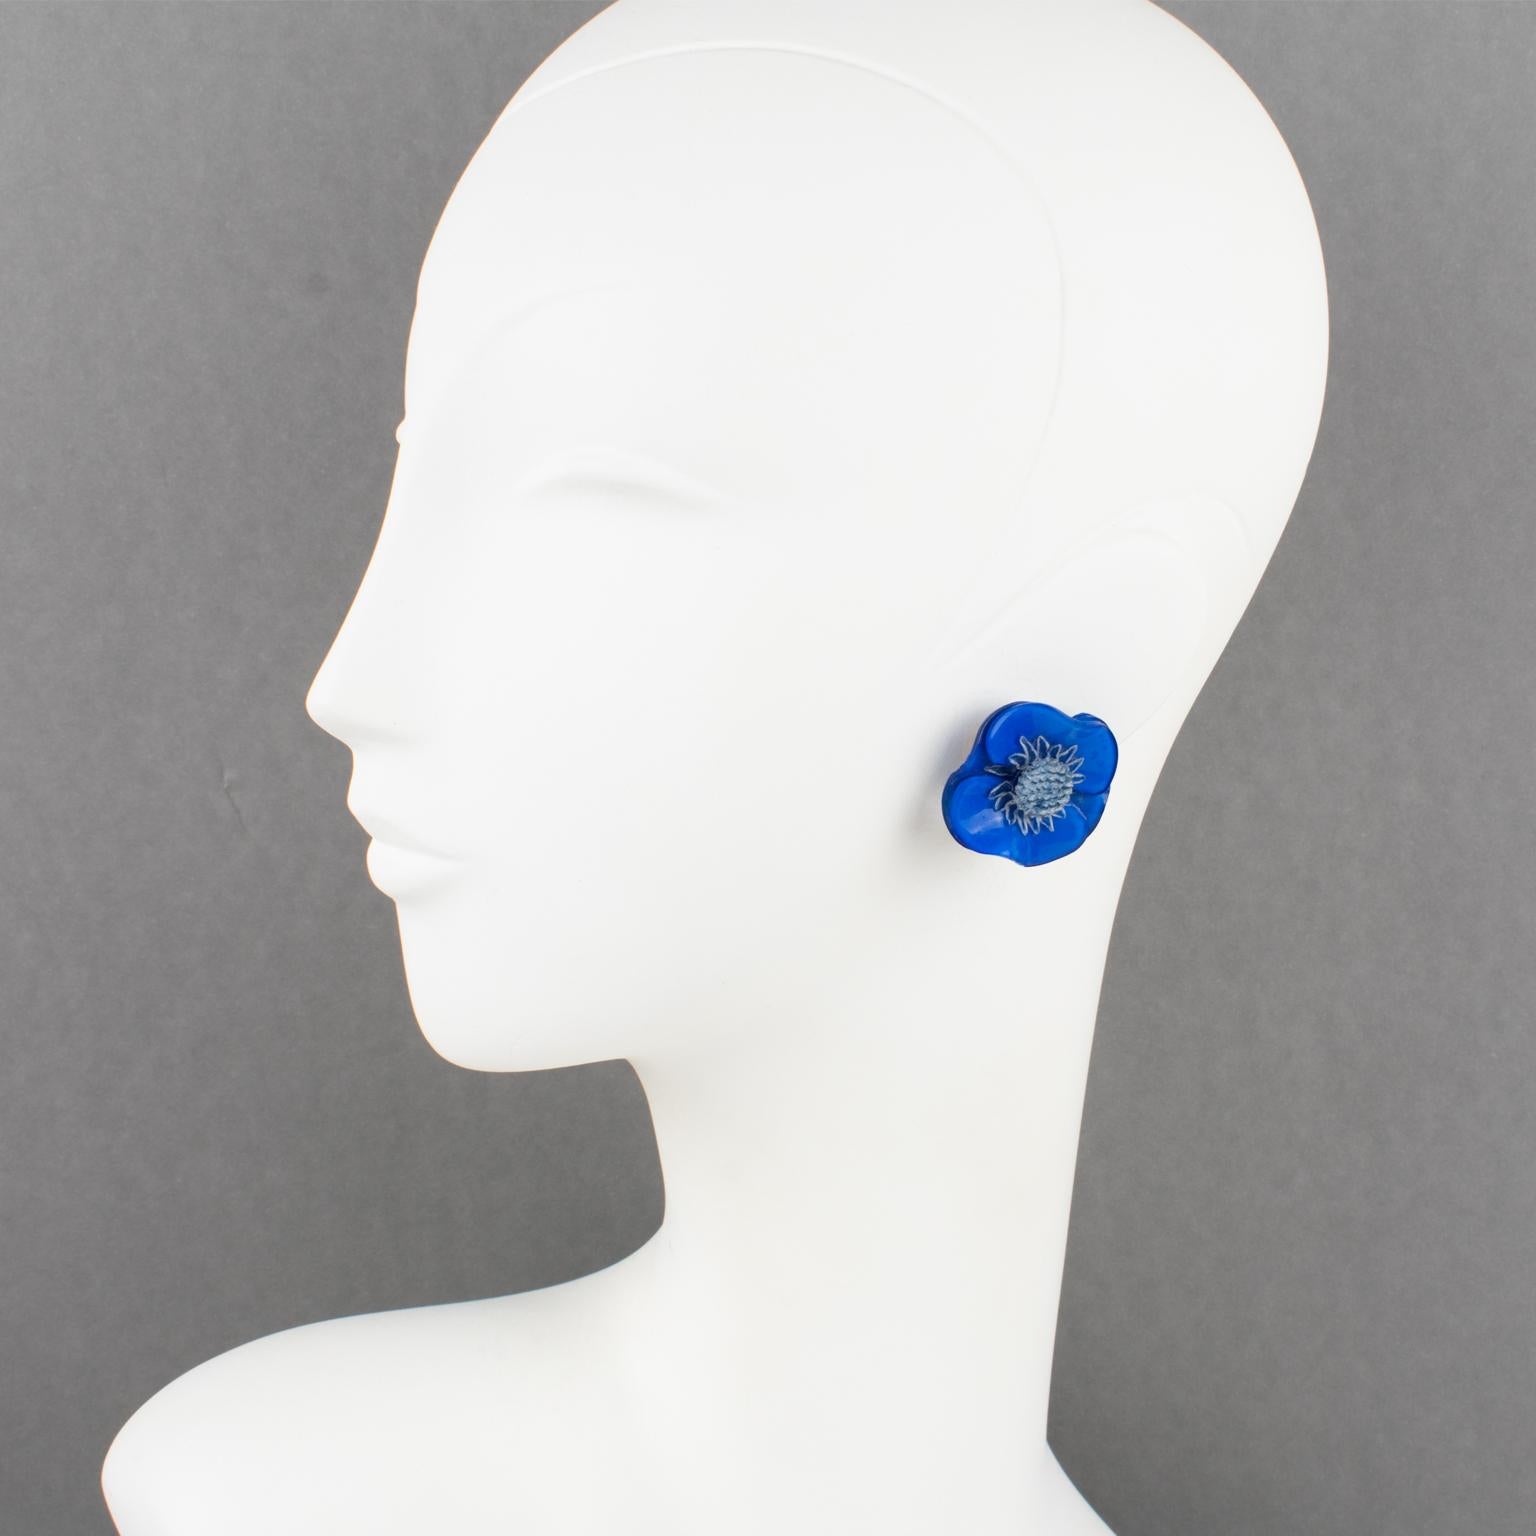 Elegant dimensional clip-on earrings designed by Cilea Paris for Francoise Montague. Floral-inspired hand-made artisanal resin earrings featuring a poppy flower with a textured heart. A very nice assorted palette of cobalt blue and periwinkle blue.